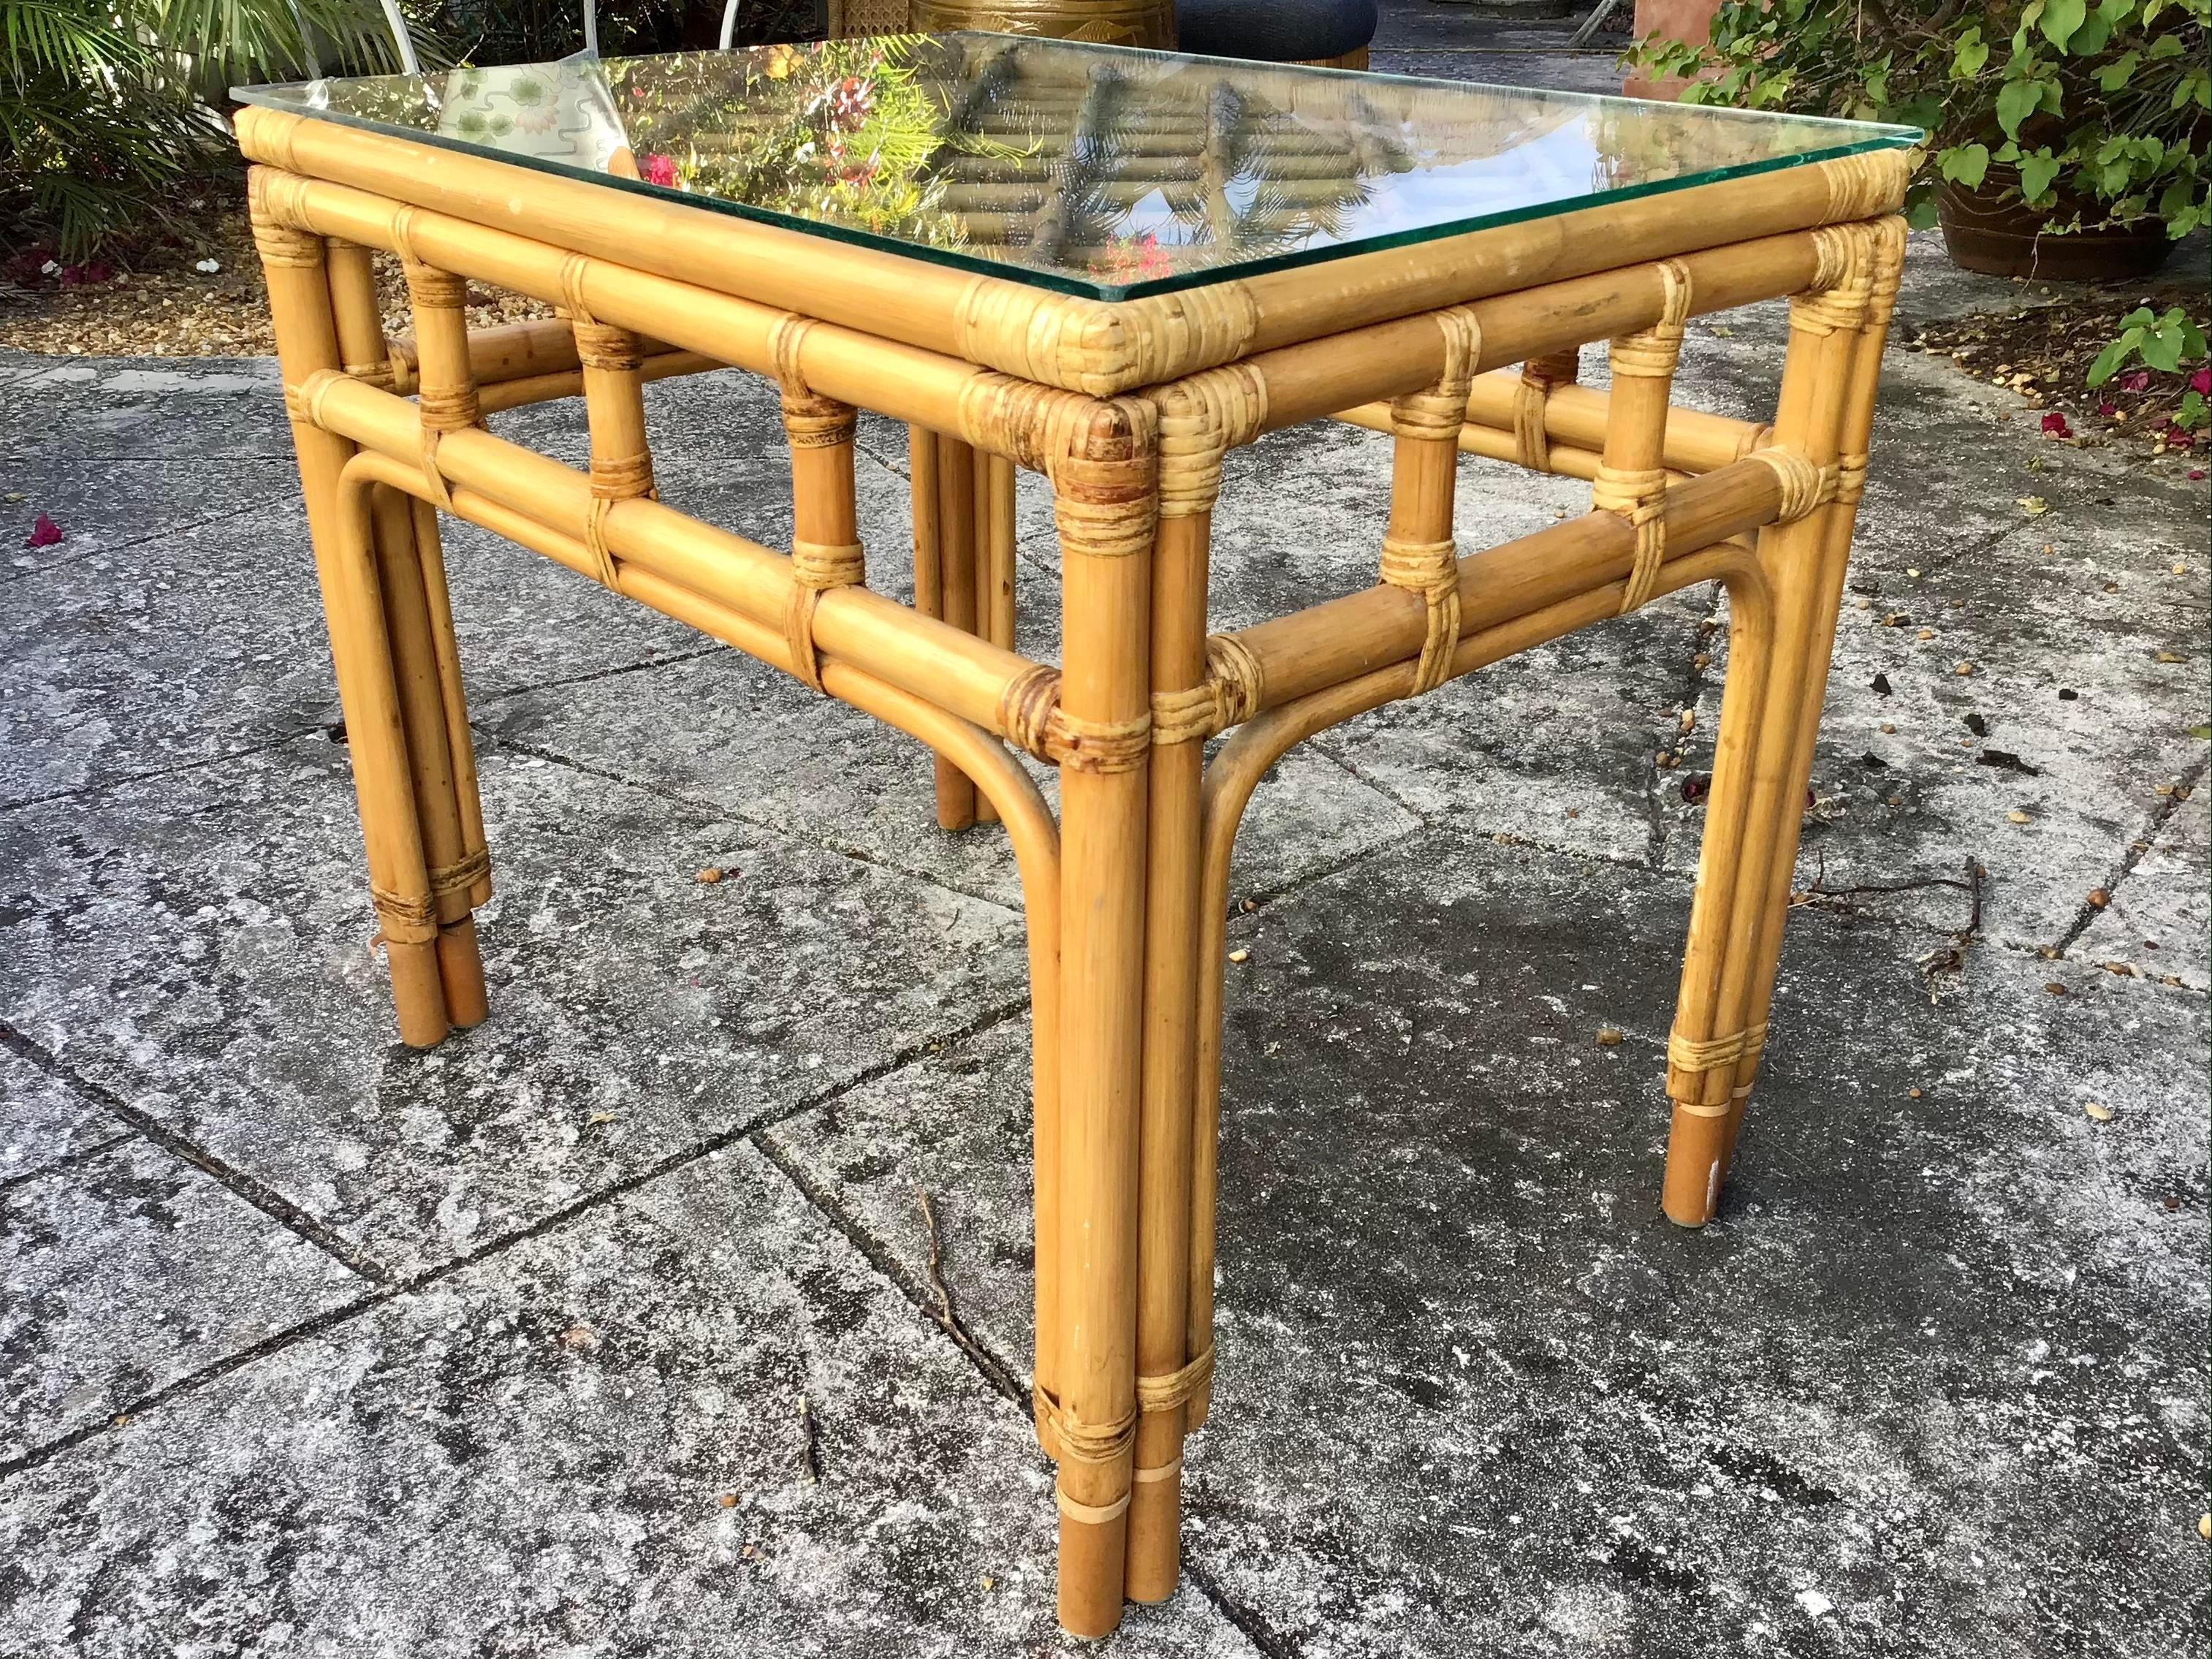 Mid-20th Century Boho Chic Rattan Side Table with Lattice Weave and Glass Top